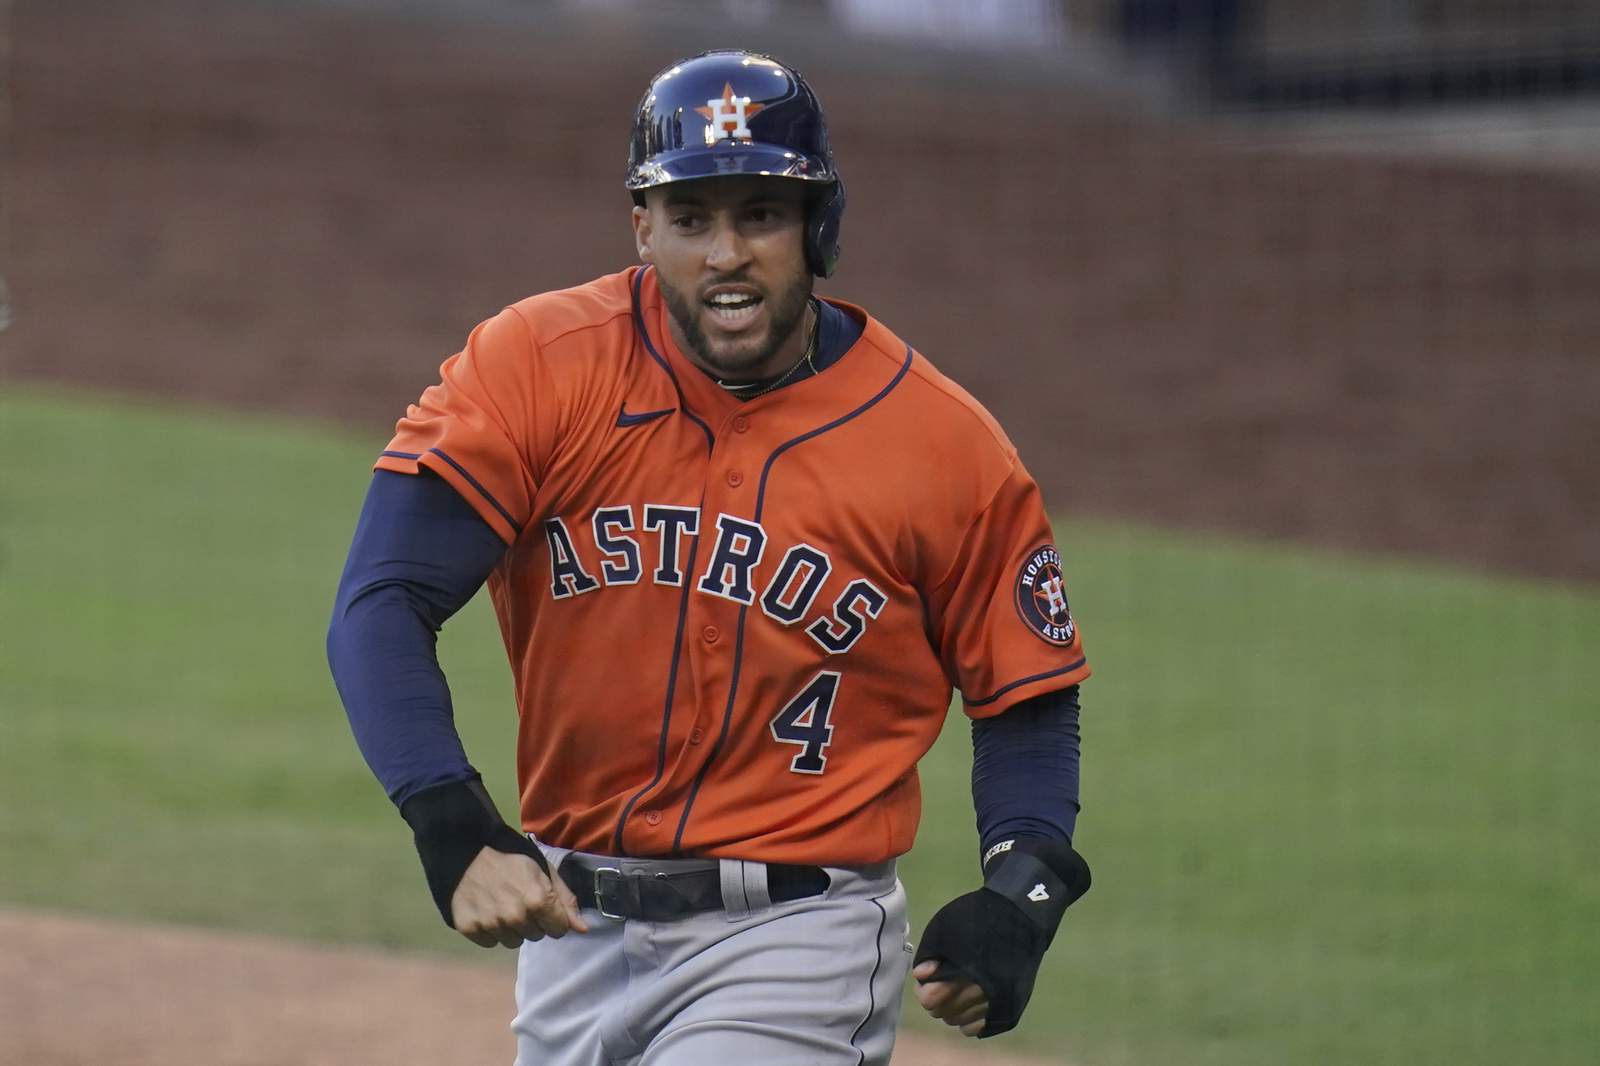 George Springer, Blue Jays agree to reported 6-year, $150 million deal